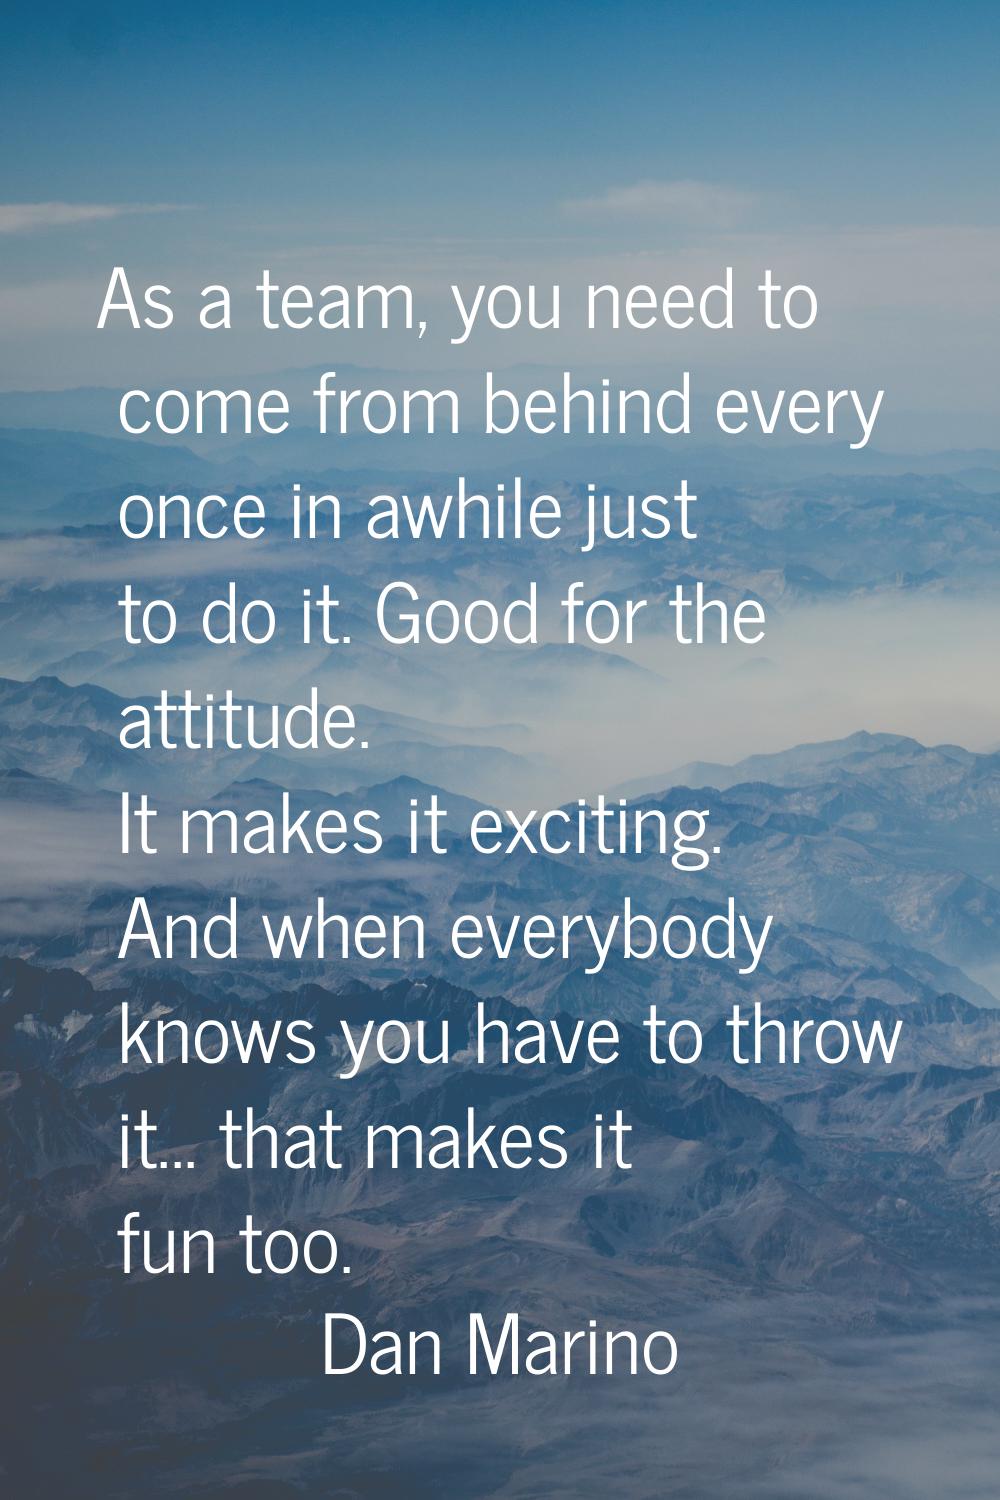 As a team, you need to come from behind every once in awhile just to do it. Good for the attitude. 